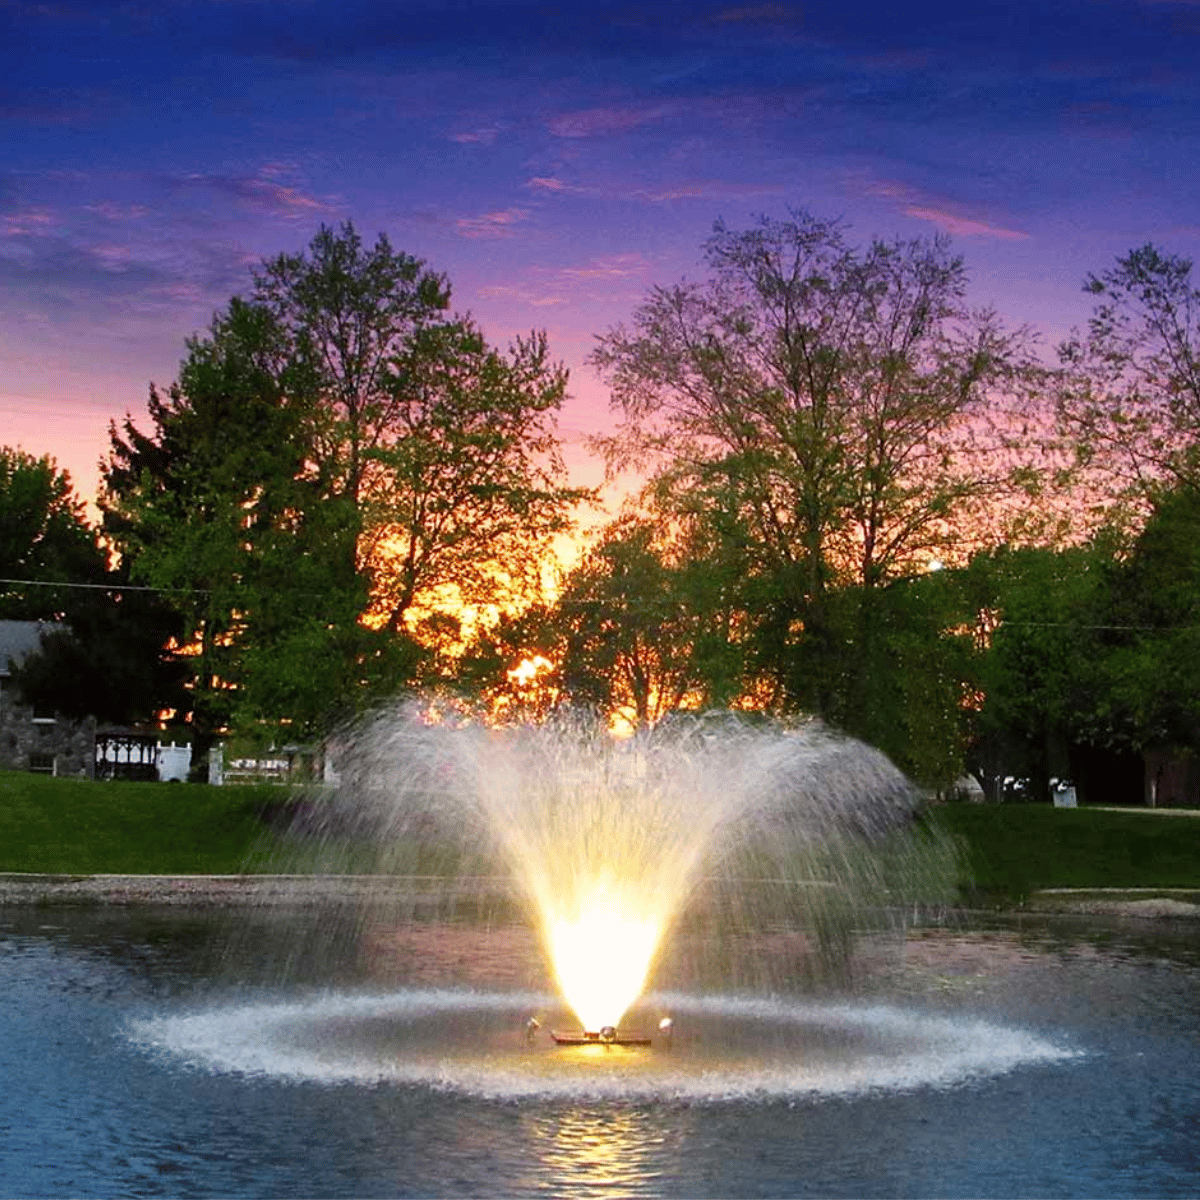 Night Glo LED Residential Fountain Lights - On Water Display with Trees at the Background